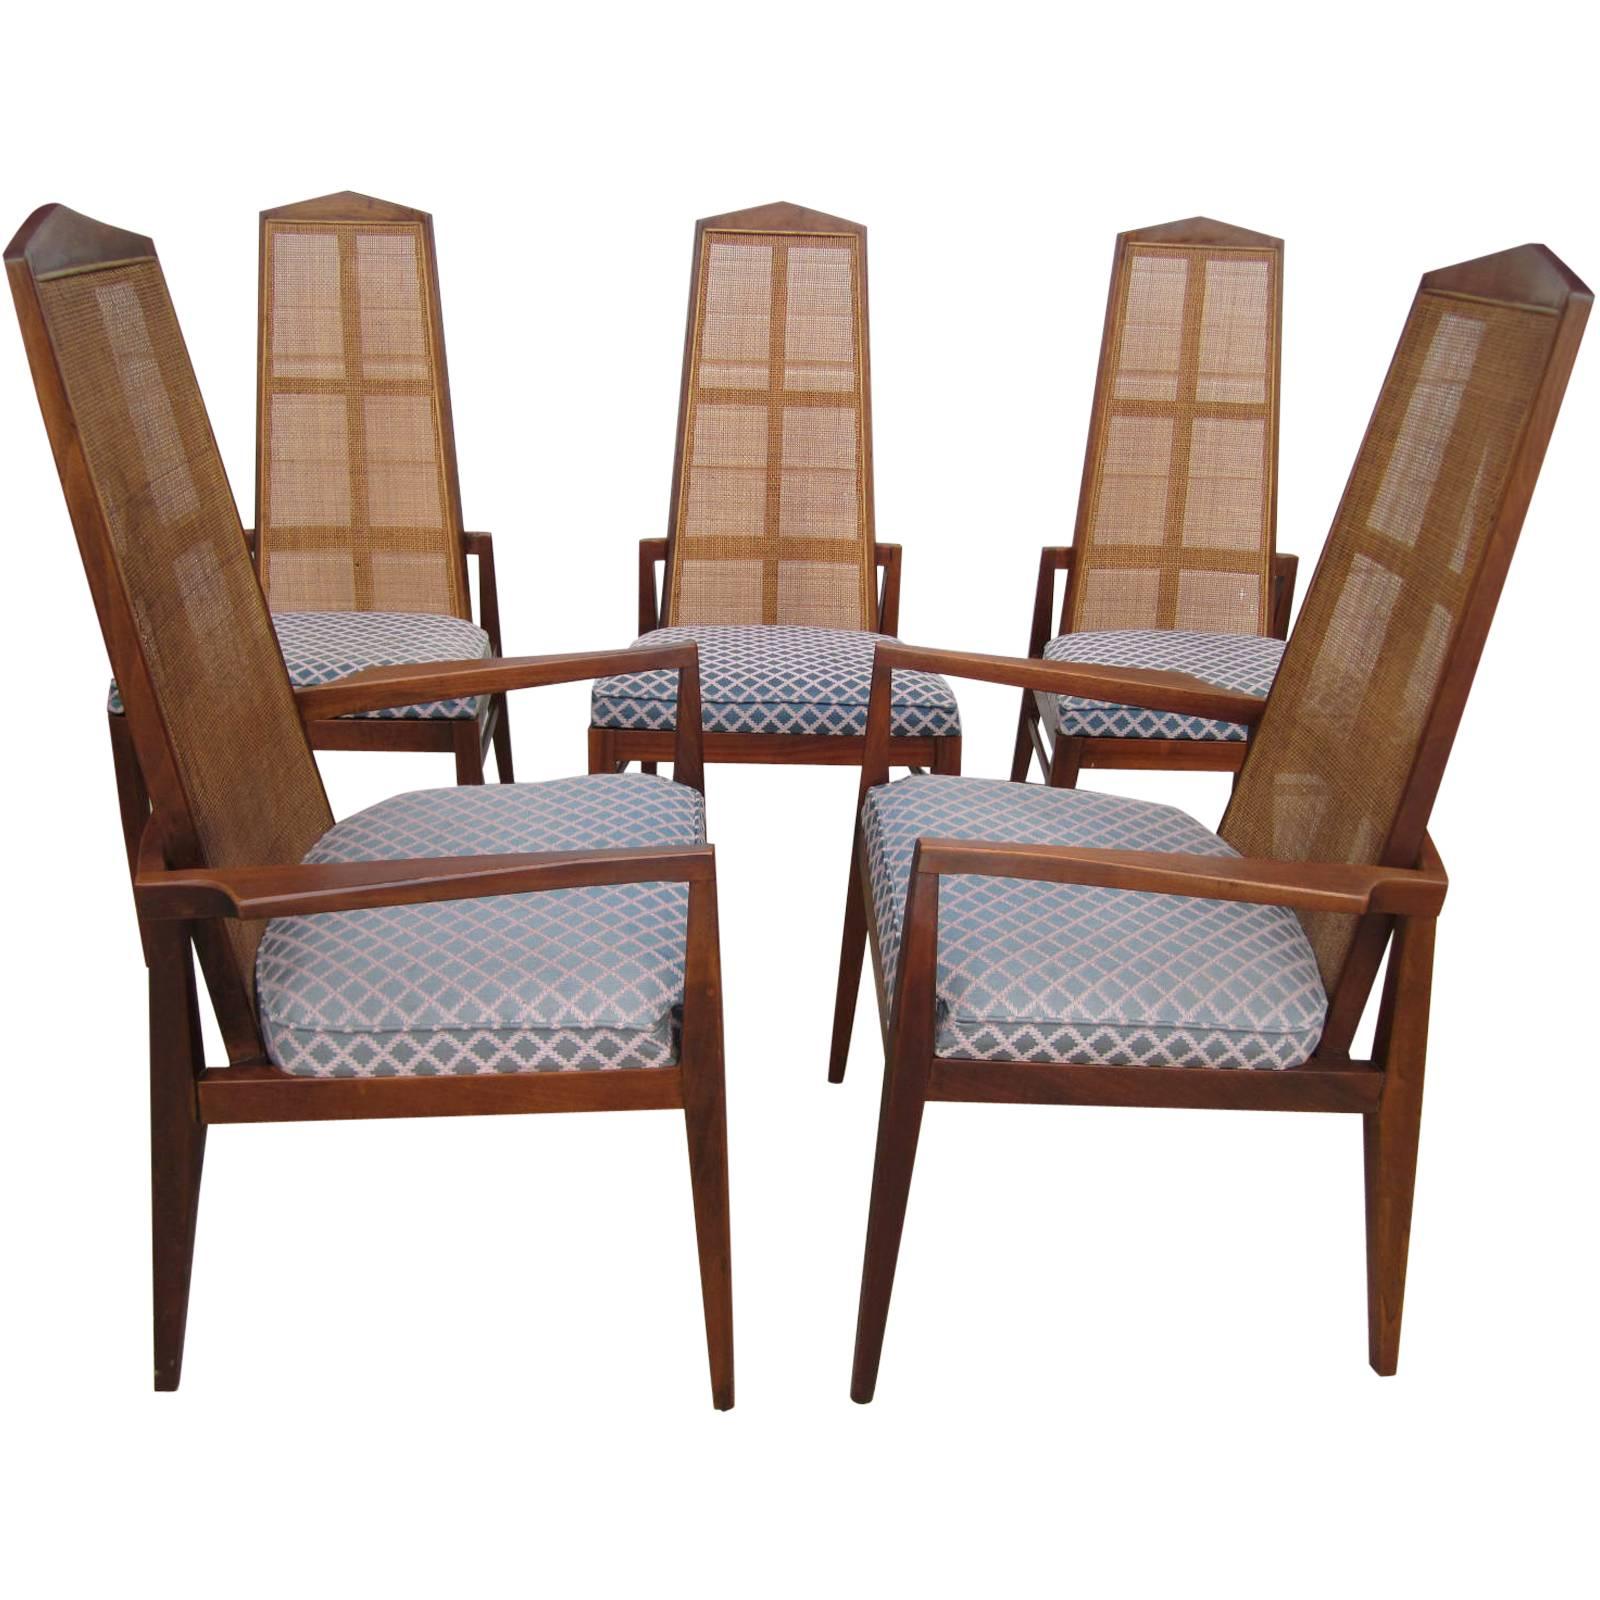 5 Walnut Foster and McDavid Cane-Back Dining Chairs, Mid-Century Modern For Sale